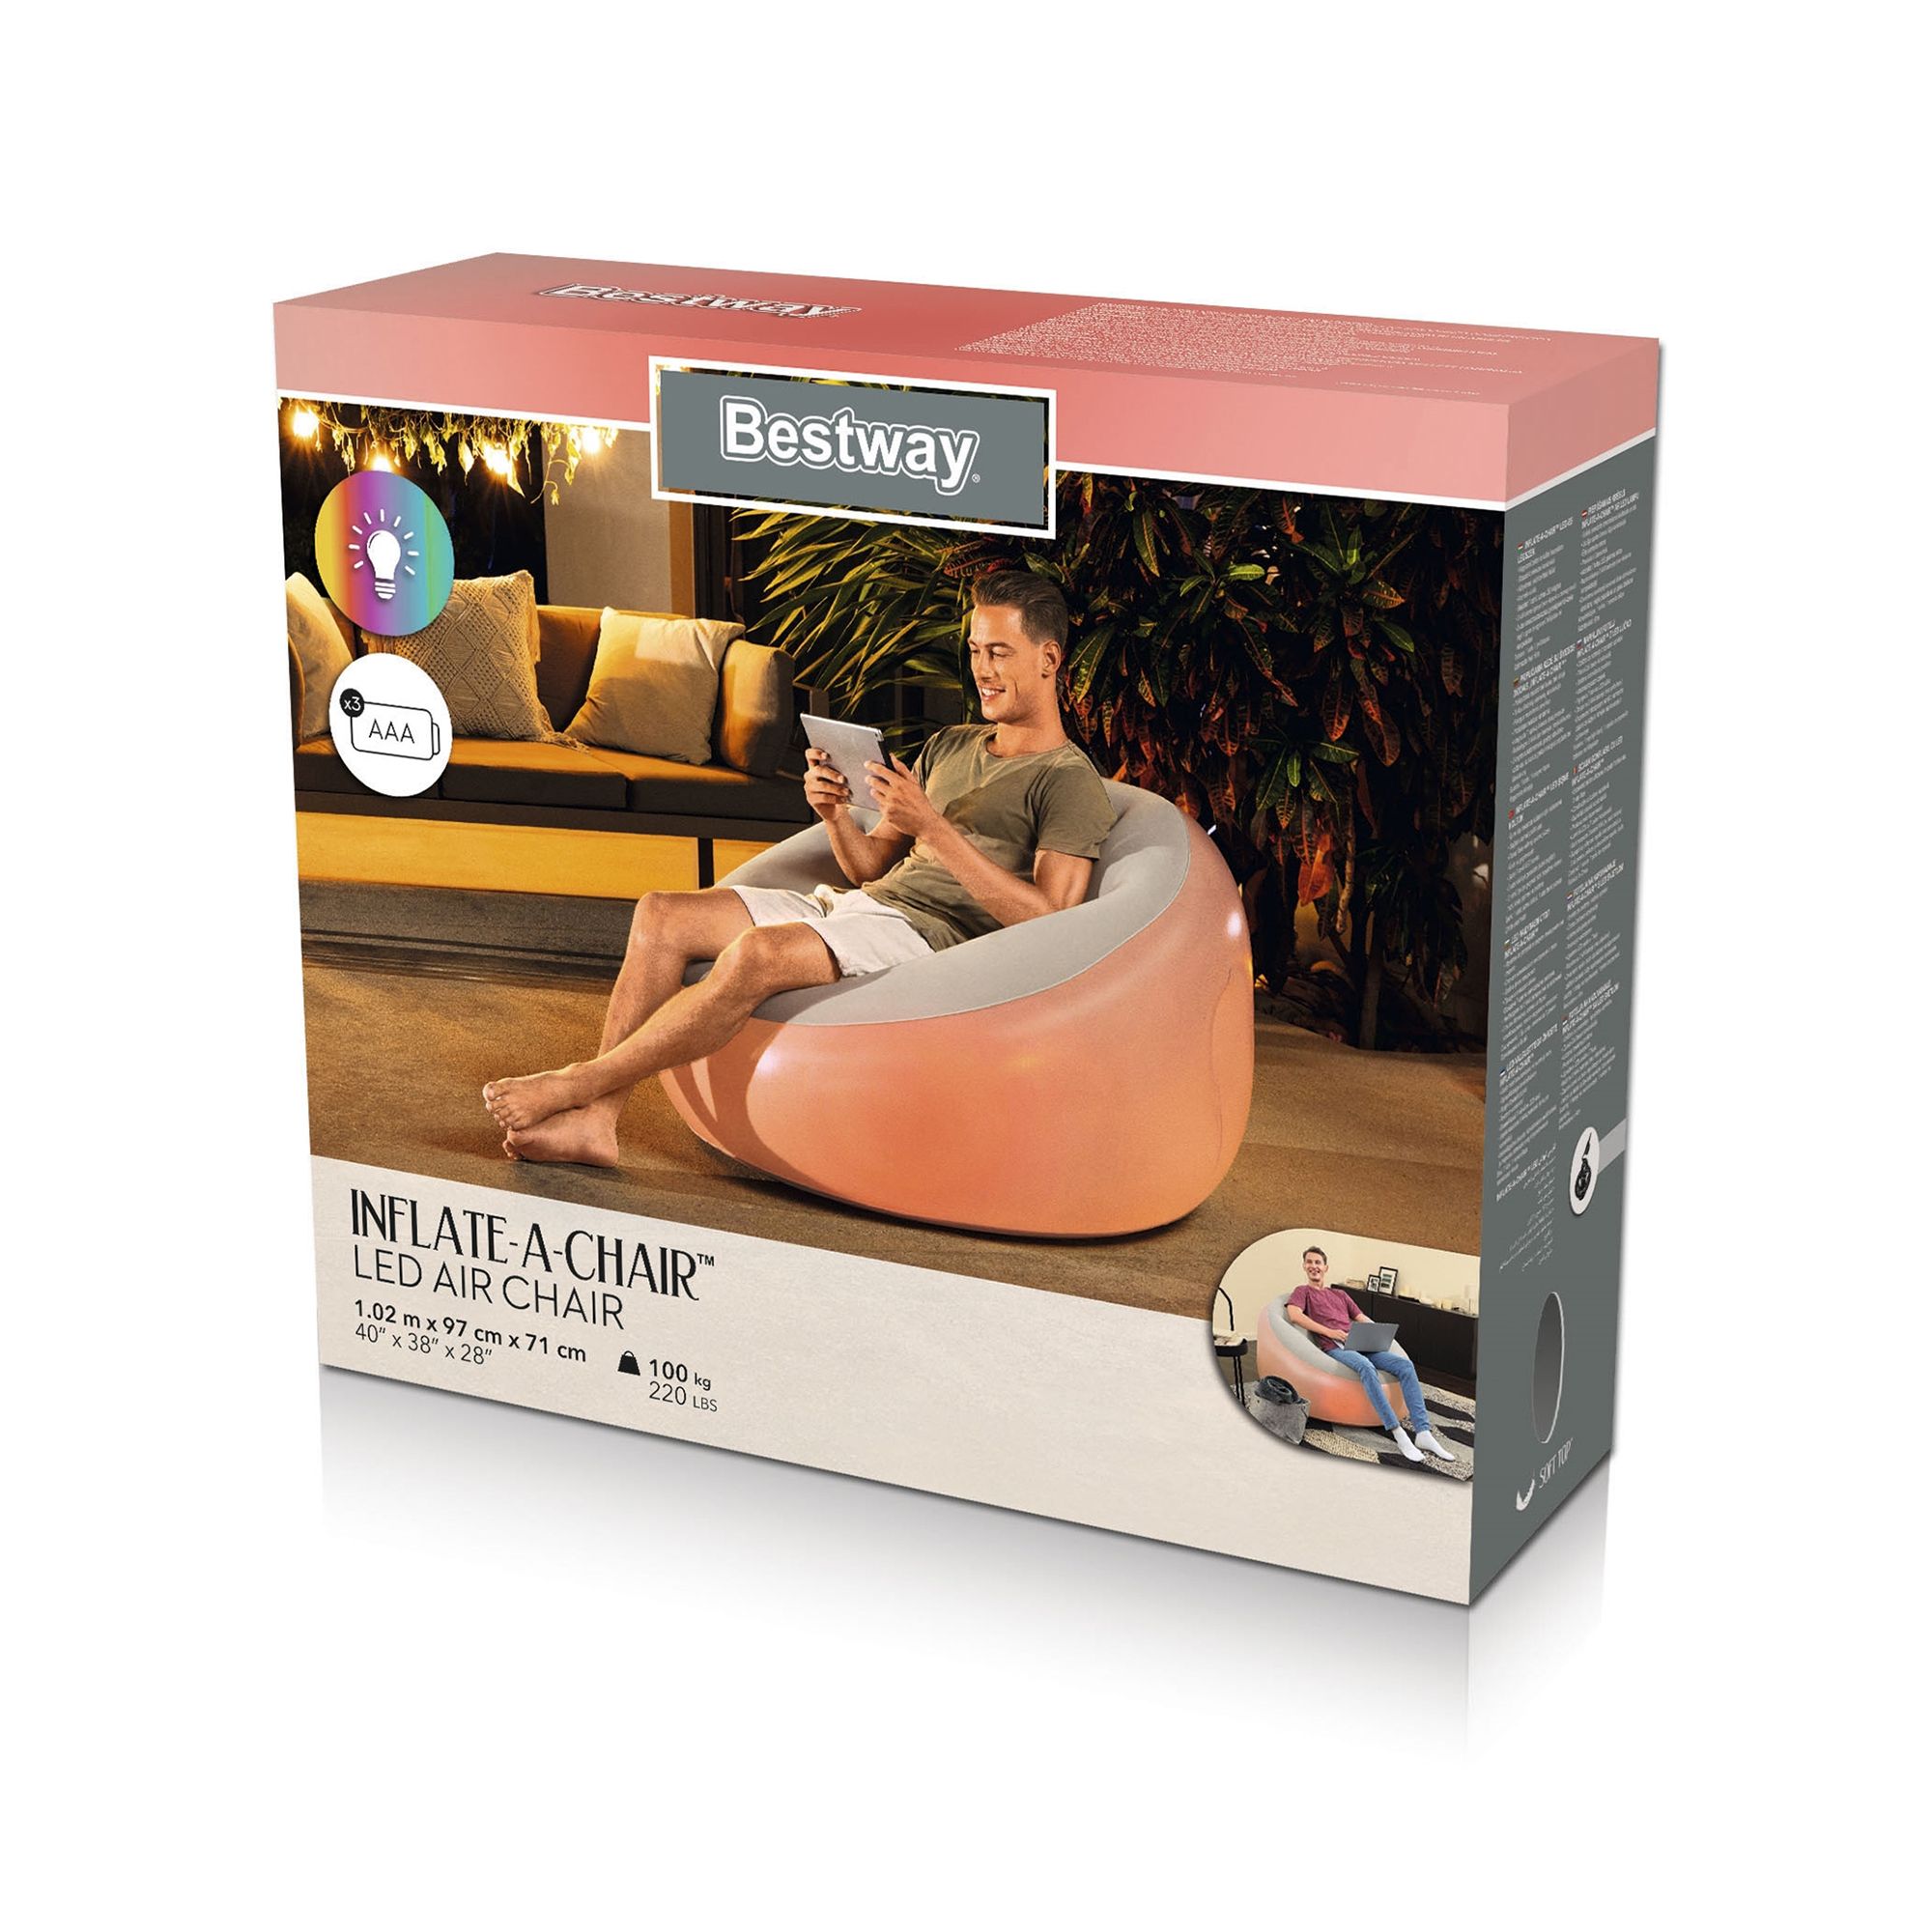 Bestway Light Grey - Multicolour LED Inflatable chair